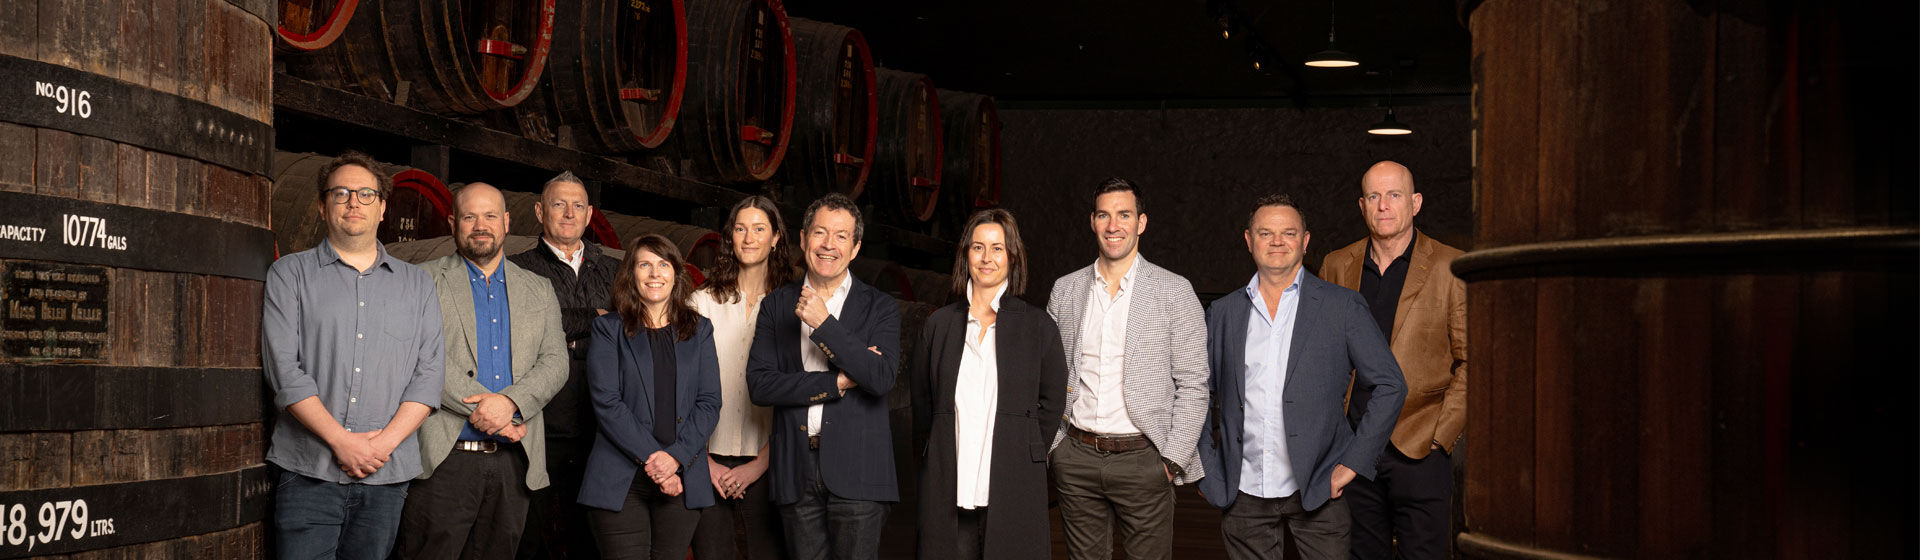 The Penfolds Winemaking Team at Magill Estate